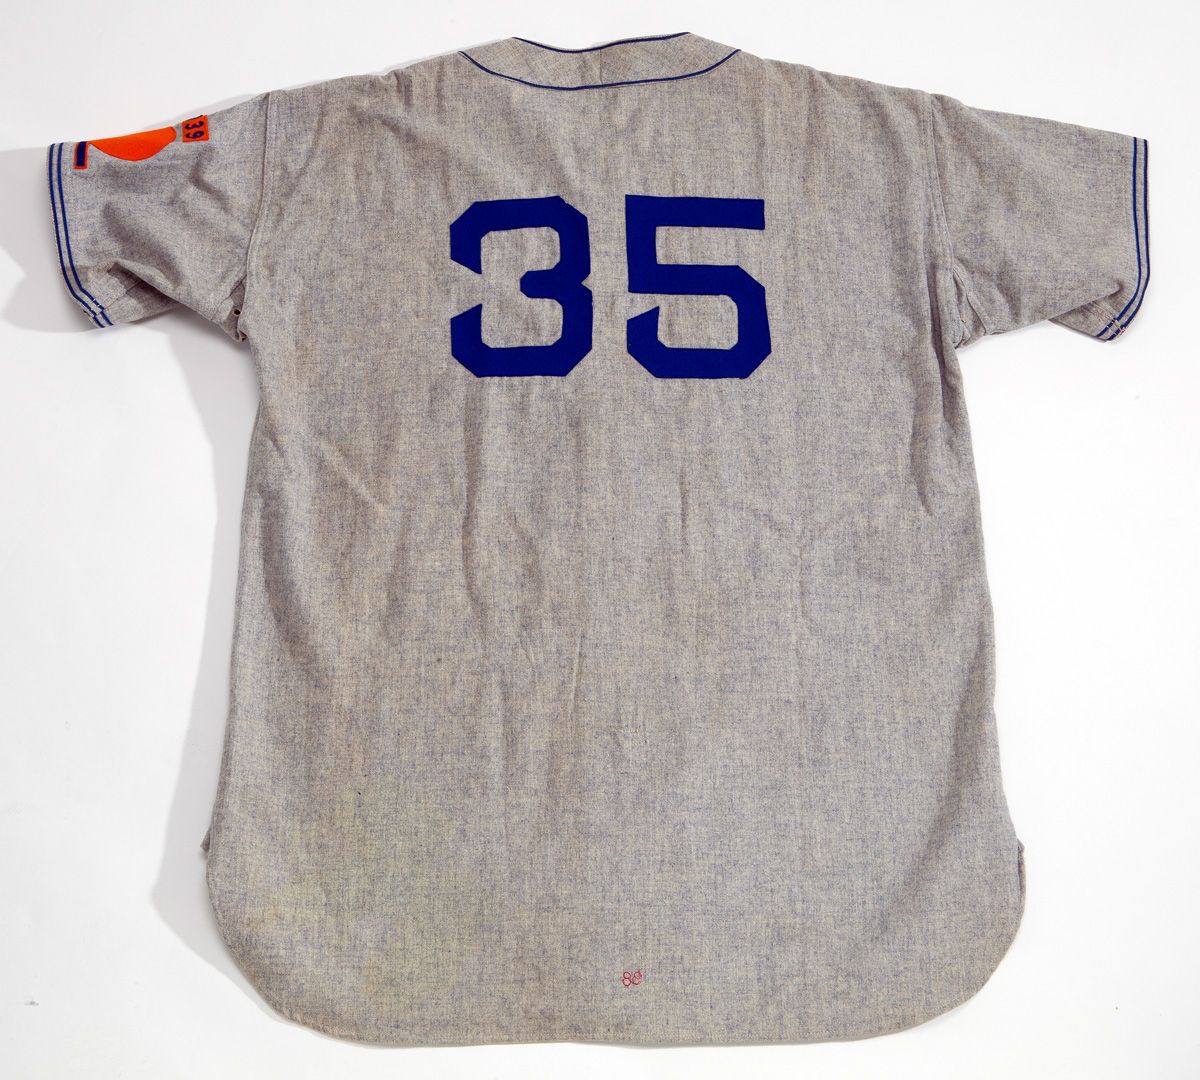 Babe Ruth's Dodgers Coaching Uniform Could Fetch Up to $500,000